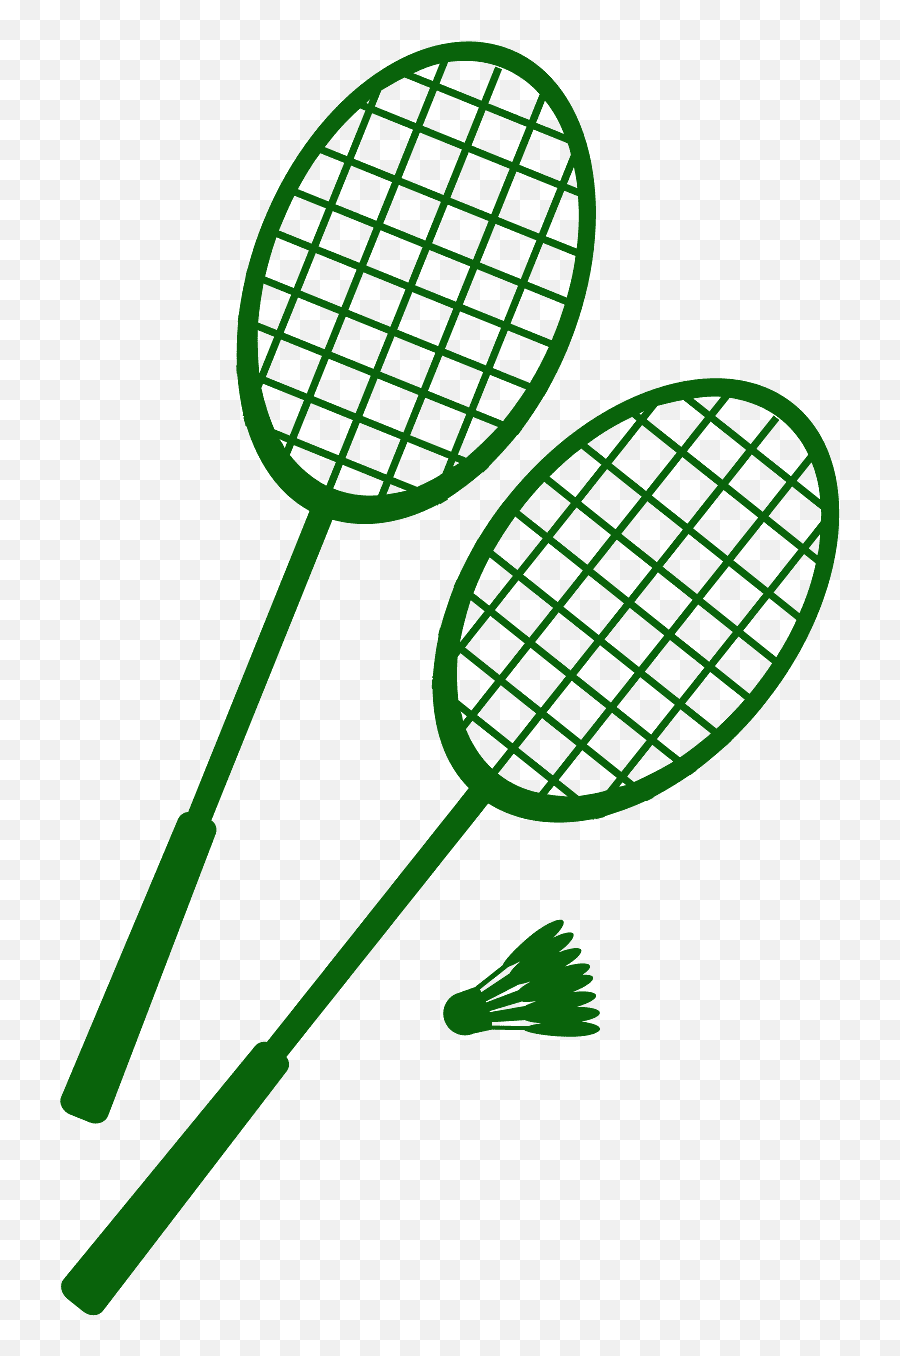 Badminton Rackets And Shuttlecock Silhouette - Free Vector All Sports Items Png,Badminton Racket Png